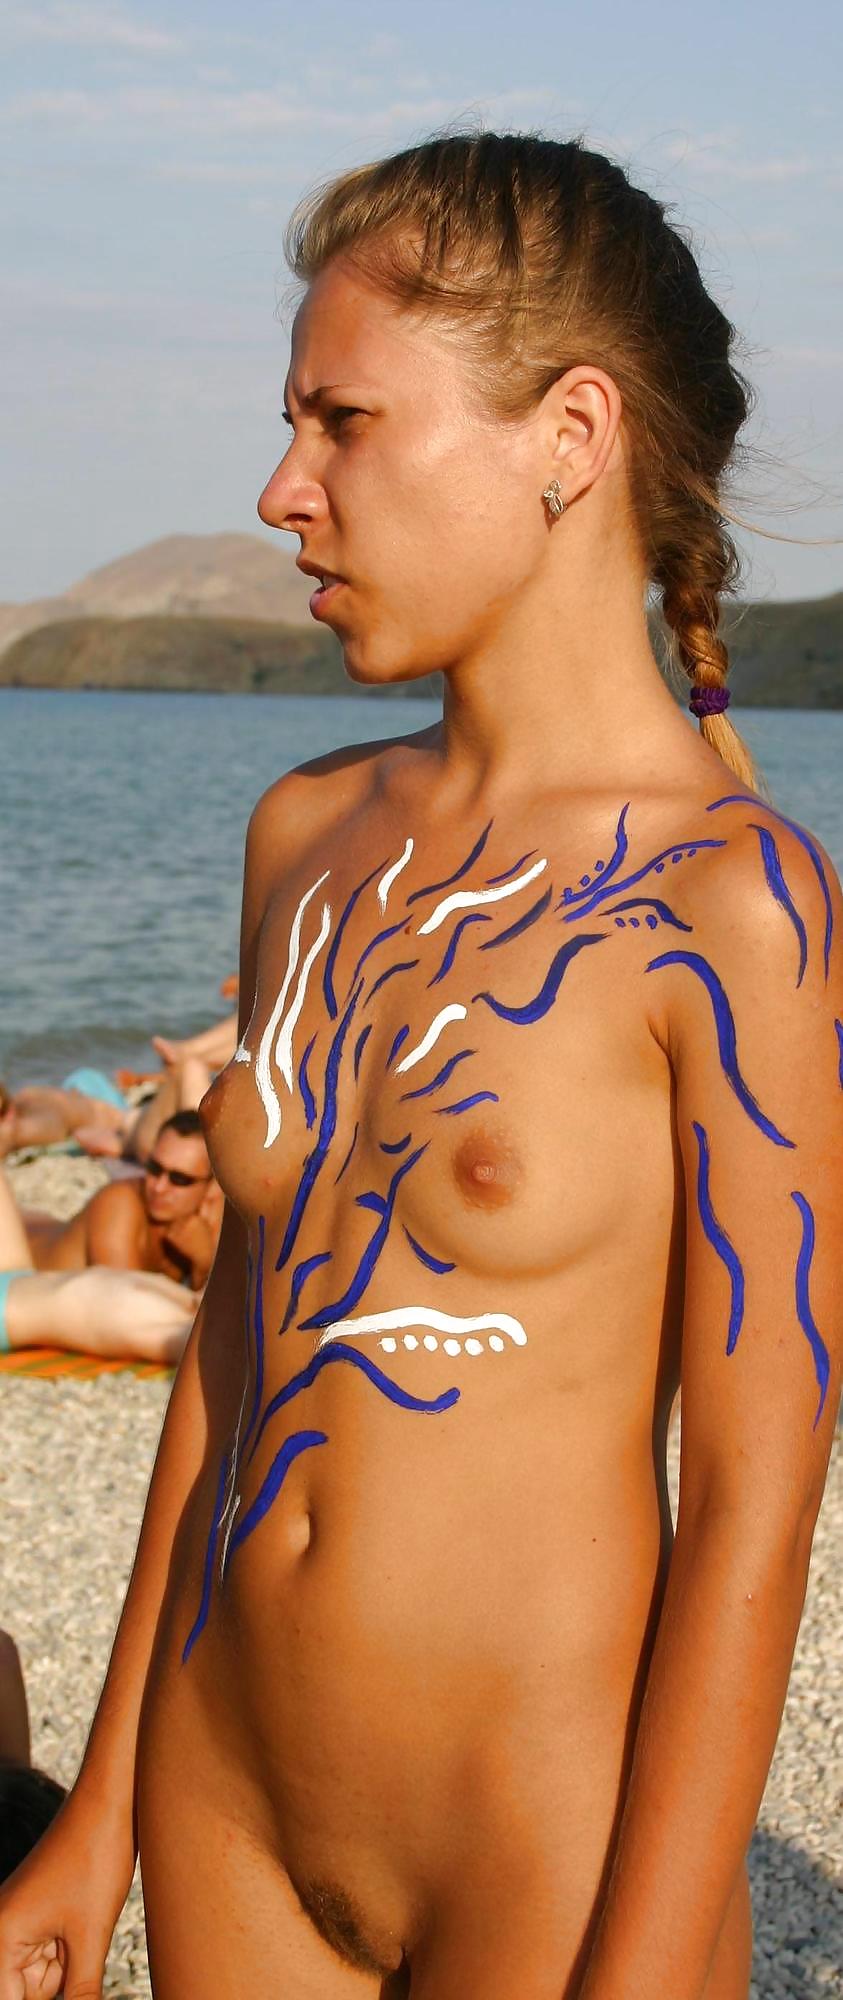 Nudist Pictures I Love 26 Body Painting